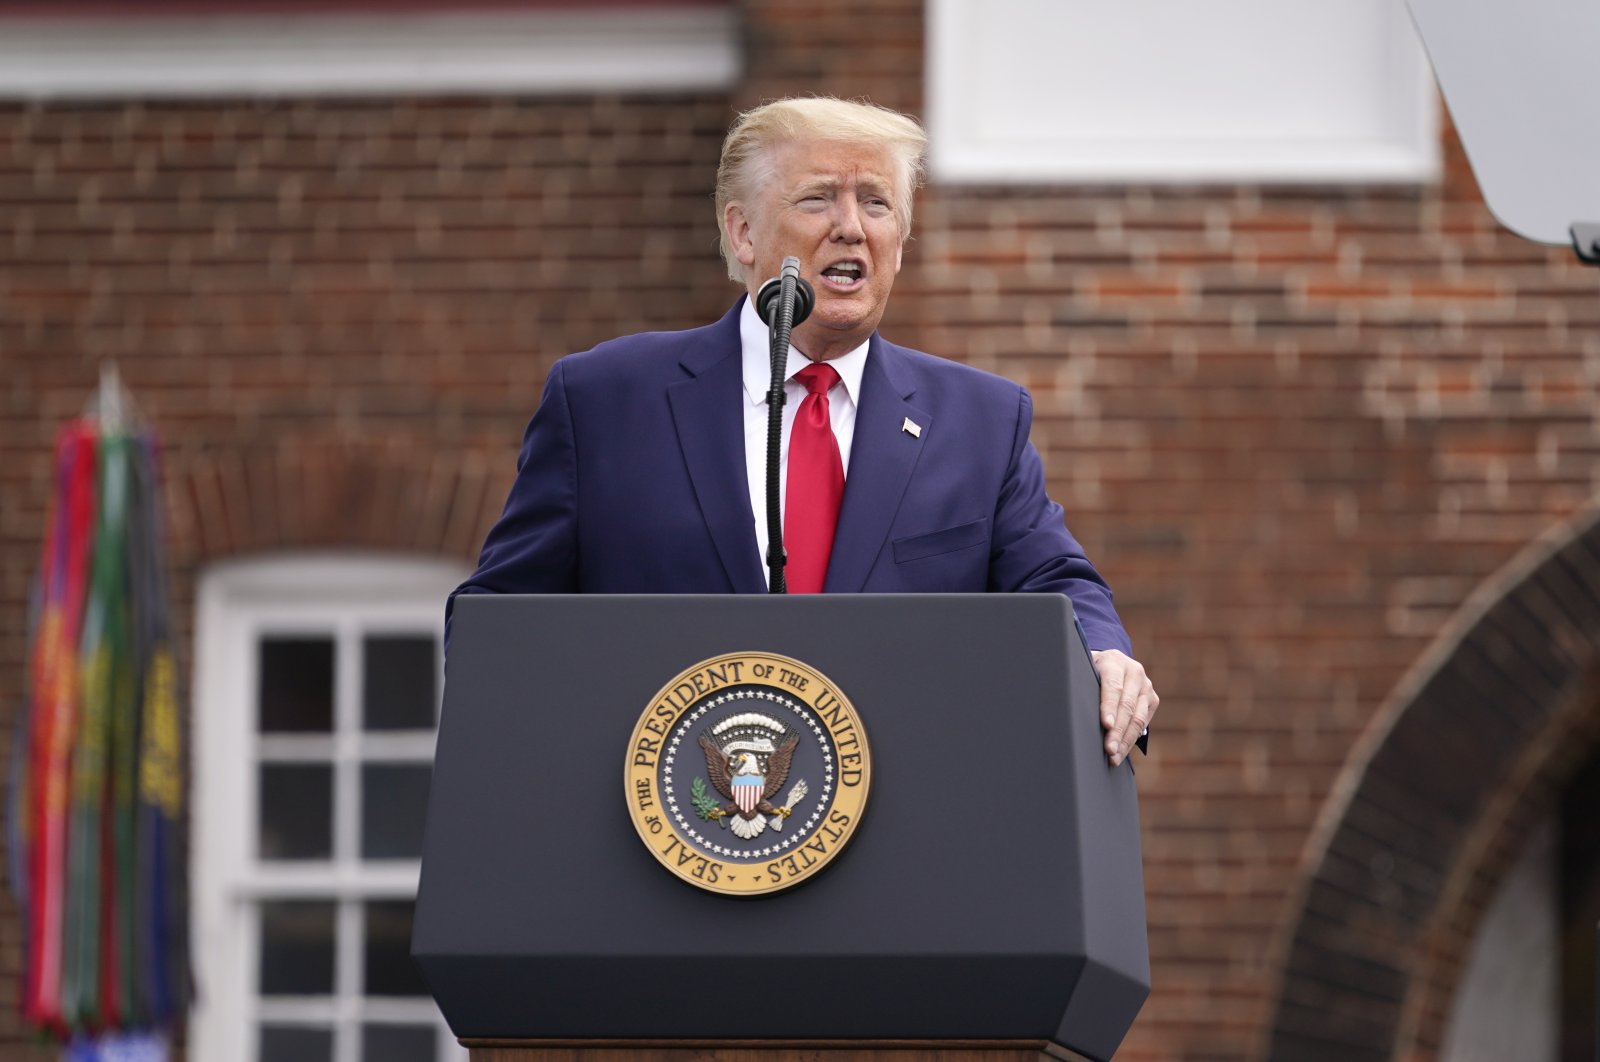 President Donald Trump speaks during a Memorial Day ceremony at Fort McHenry National Monument and Historic Shrine, Monday, May 25, 2020, in Baltimore. (AP Photo)